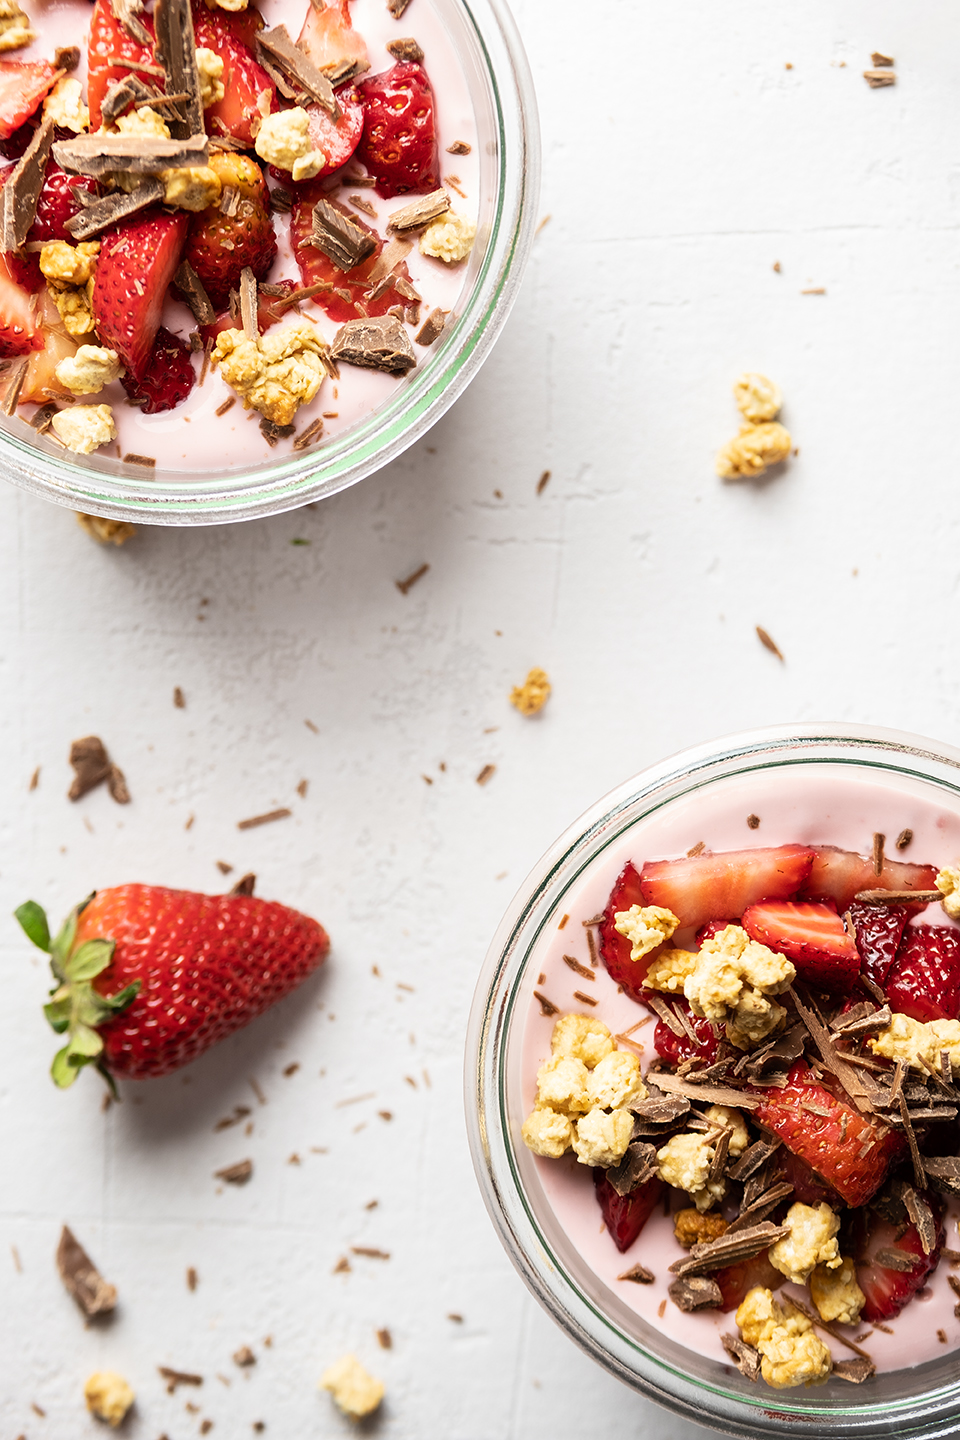  Creamy strawberry and greek yogurt with granola, sliced strawberries and shaved chocolate on textured white background. 